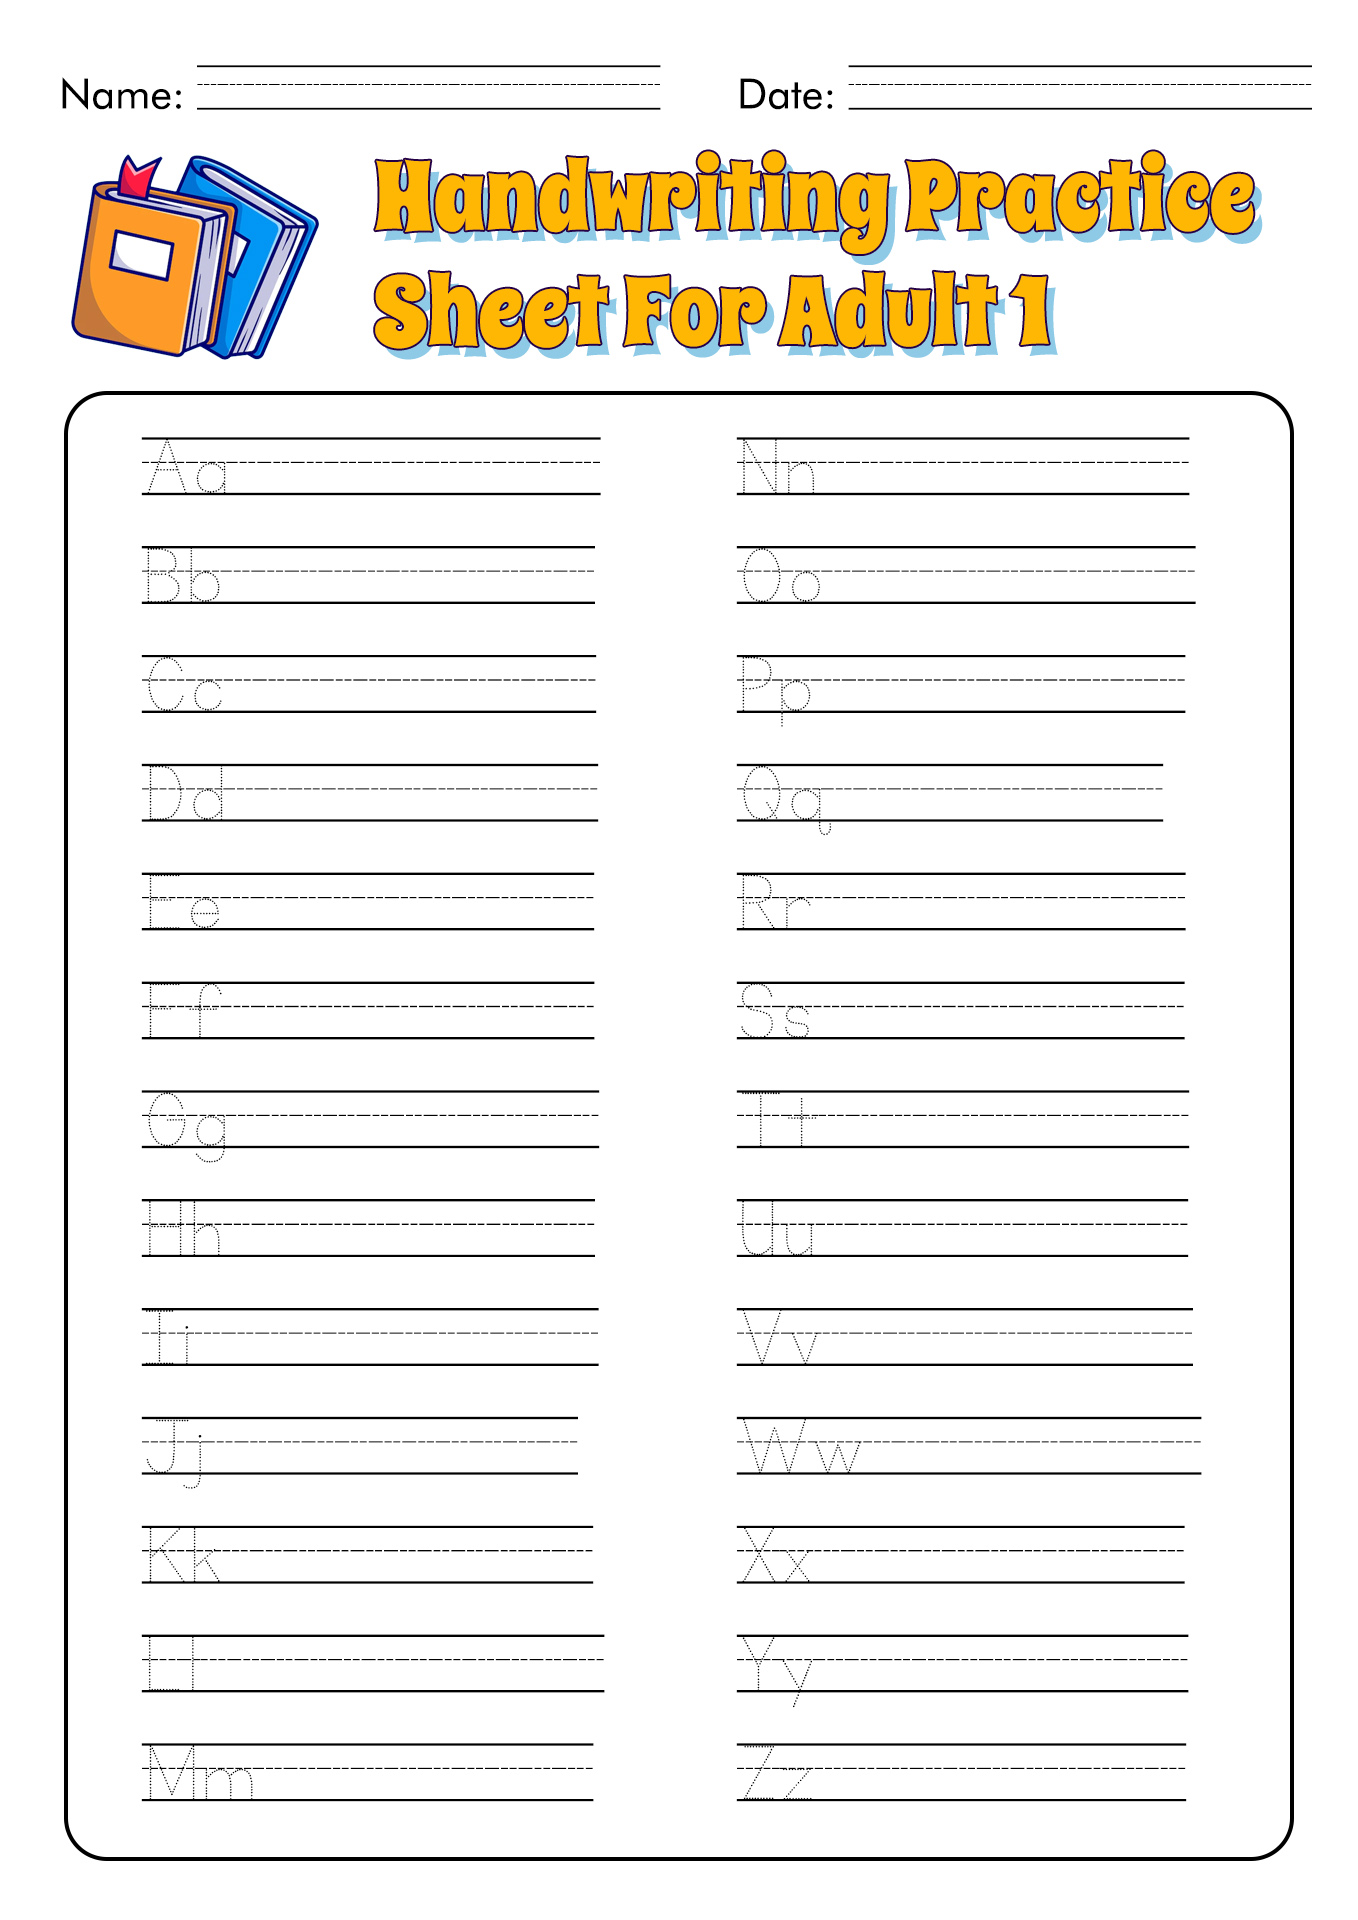 Print Handwriting Worksheets for Adults Image